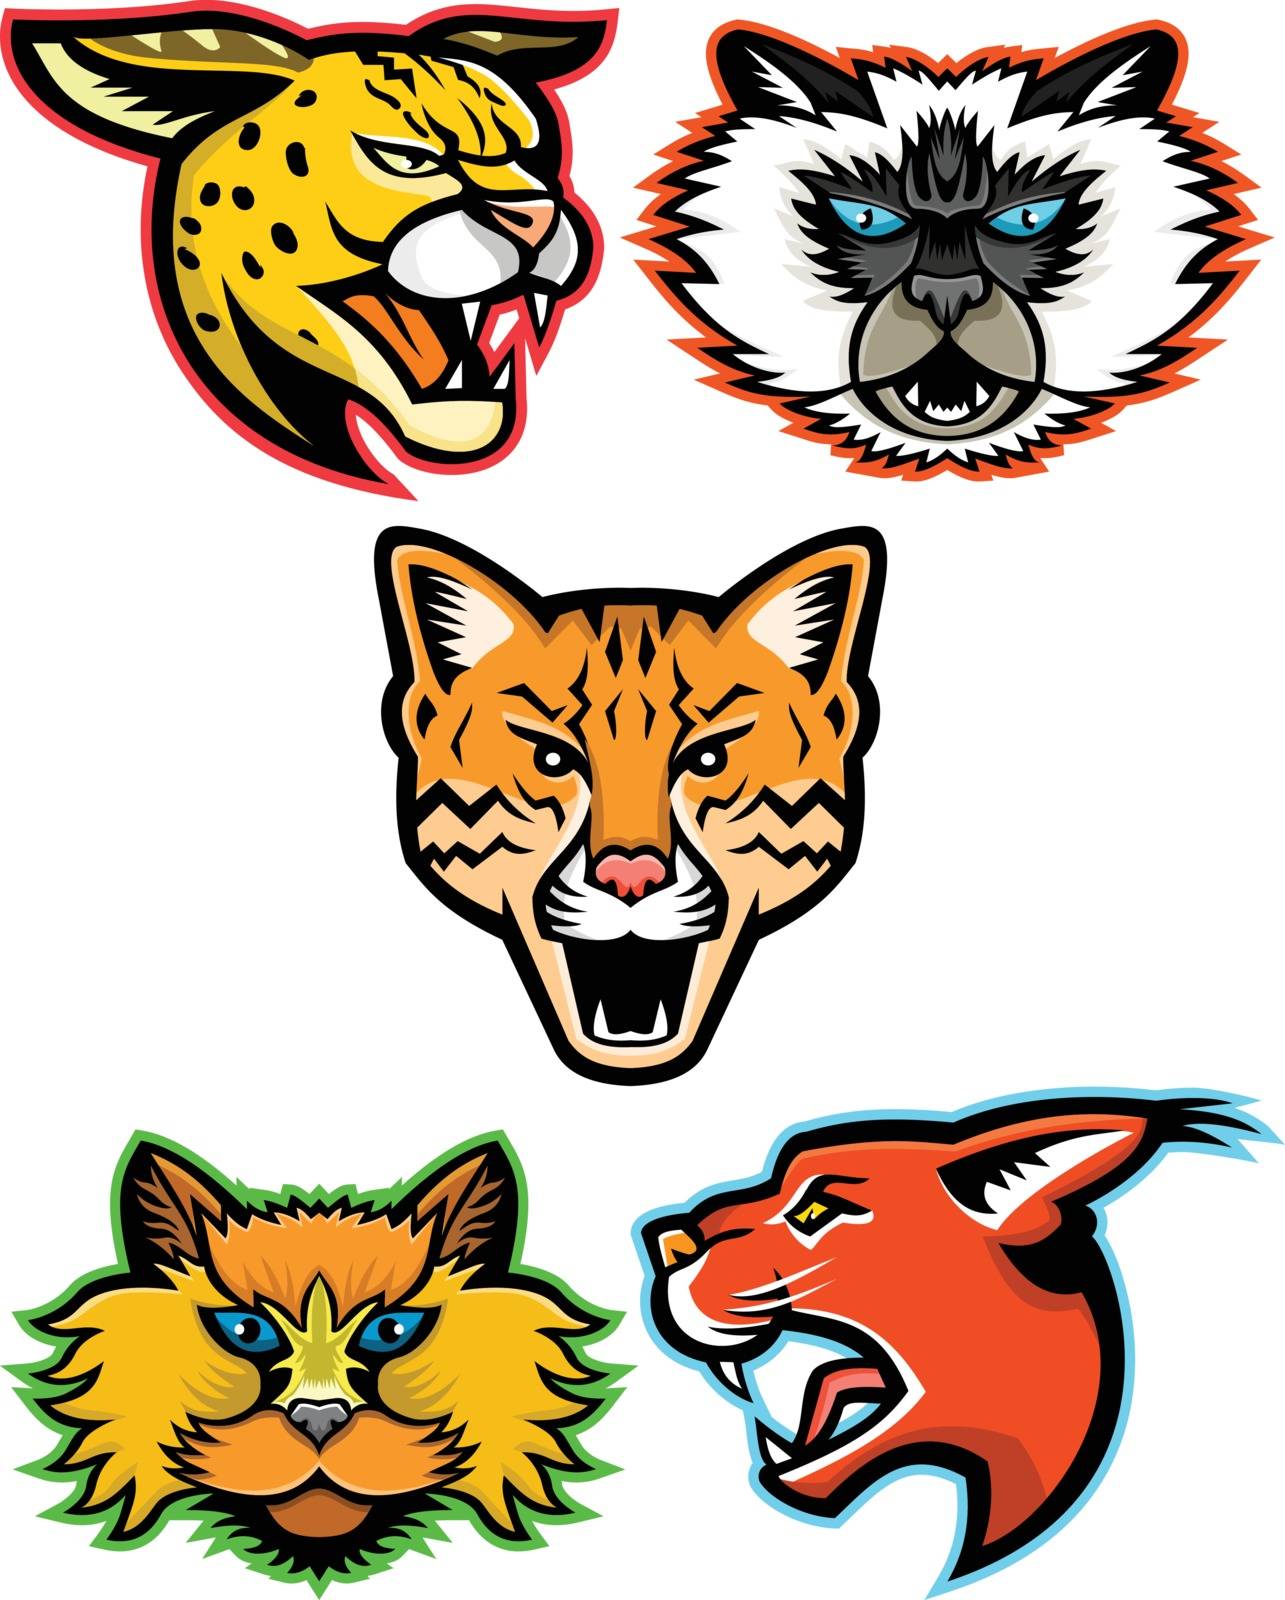 Sports mascot icon set of heads of wild and domestic cats like the serval, Himalayan cat, ocelot, Selkirk Rex cat and the caracal cat  viewed from side  on isolated background in retro style.